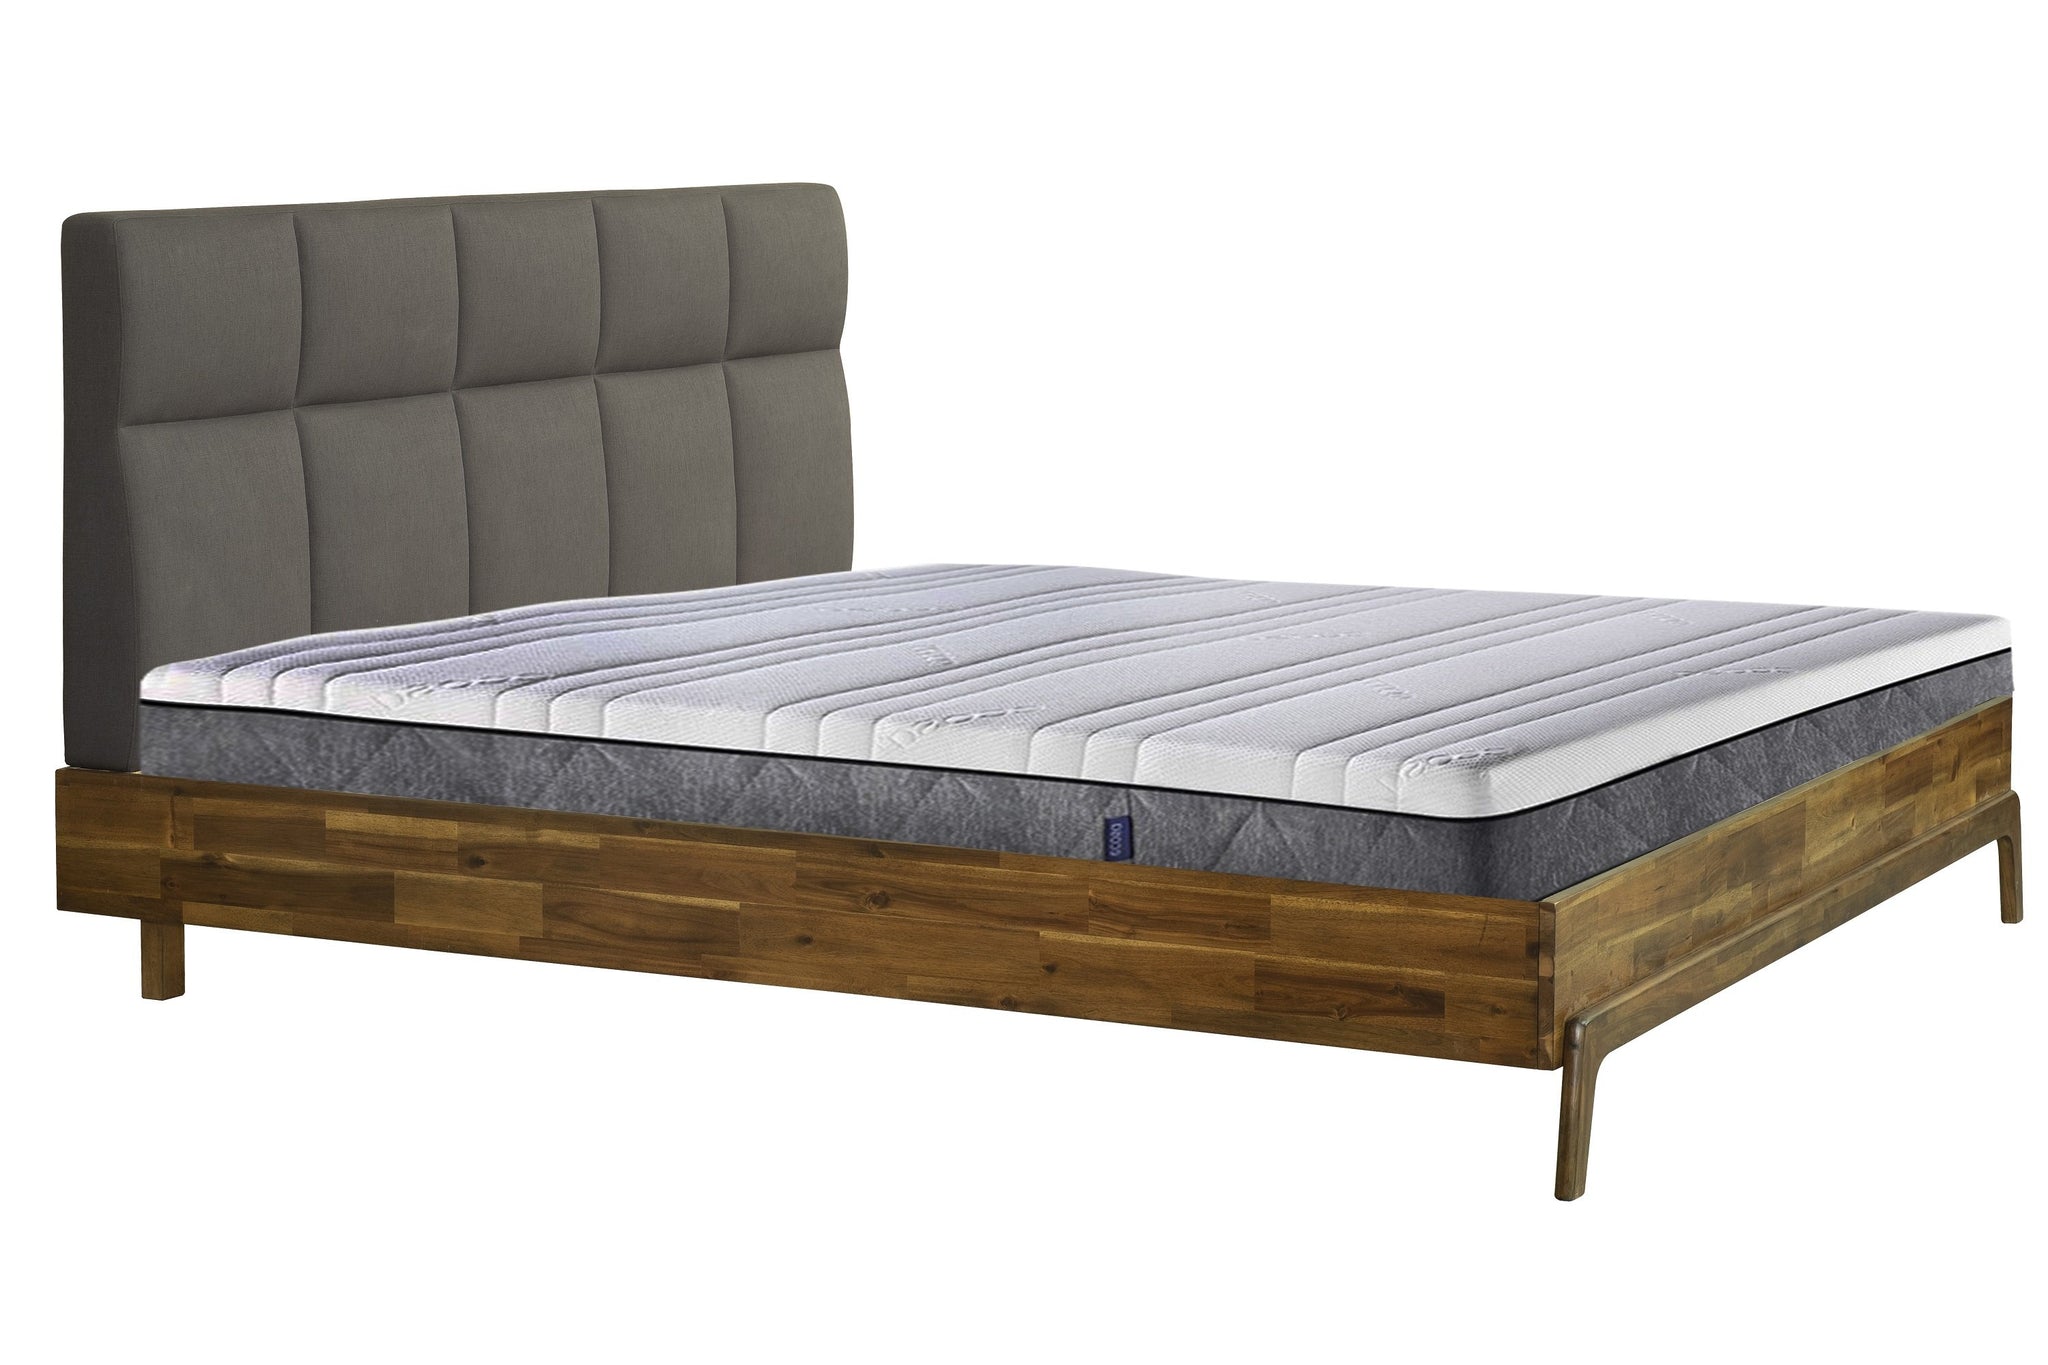 Picture of Remix King Bed - Headboard + Footboard - Grey